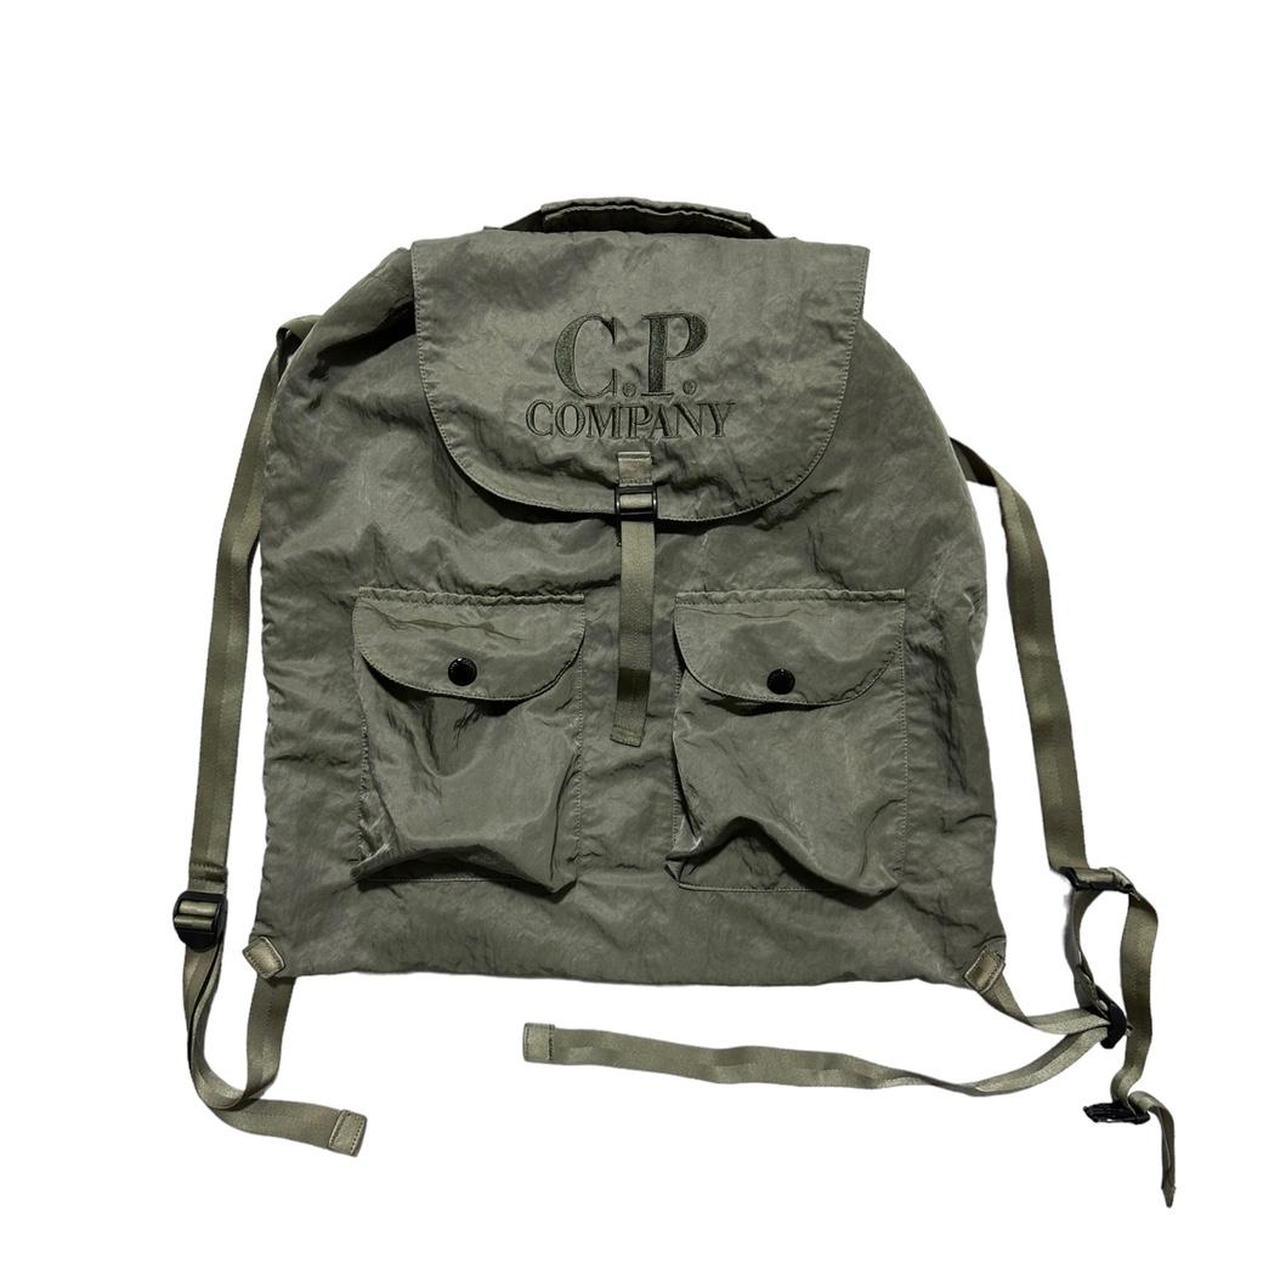 CP Company Green Backpack - Known Source